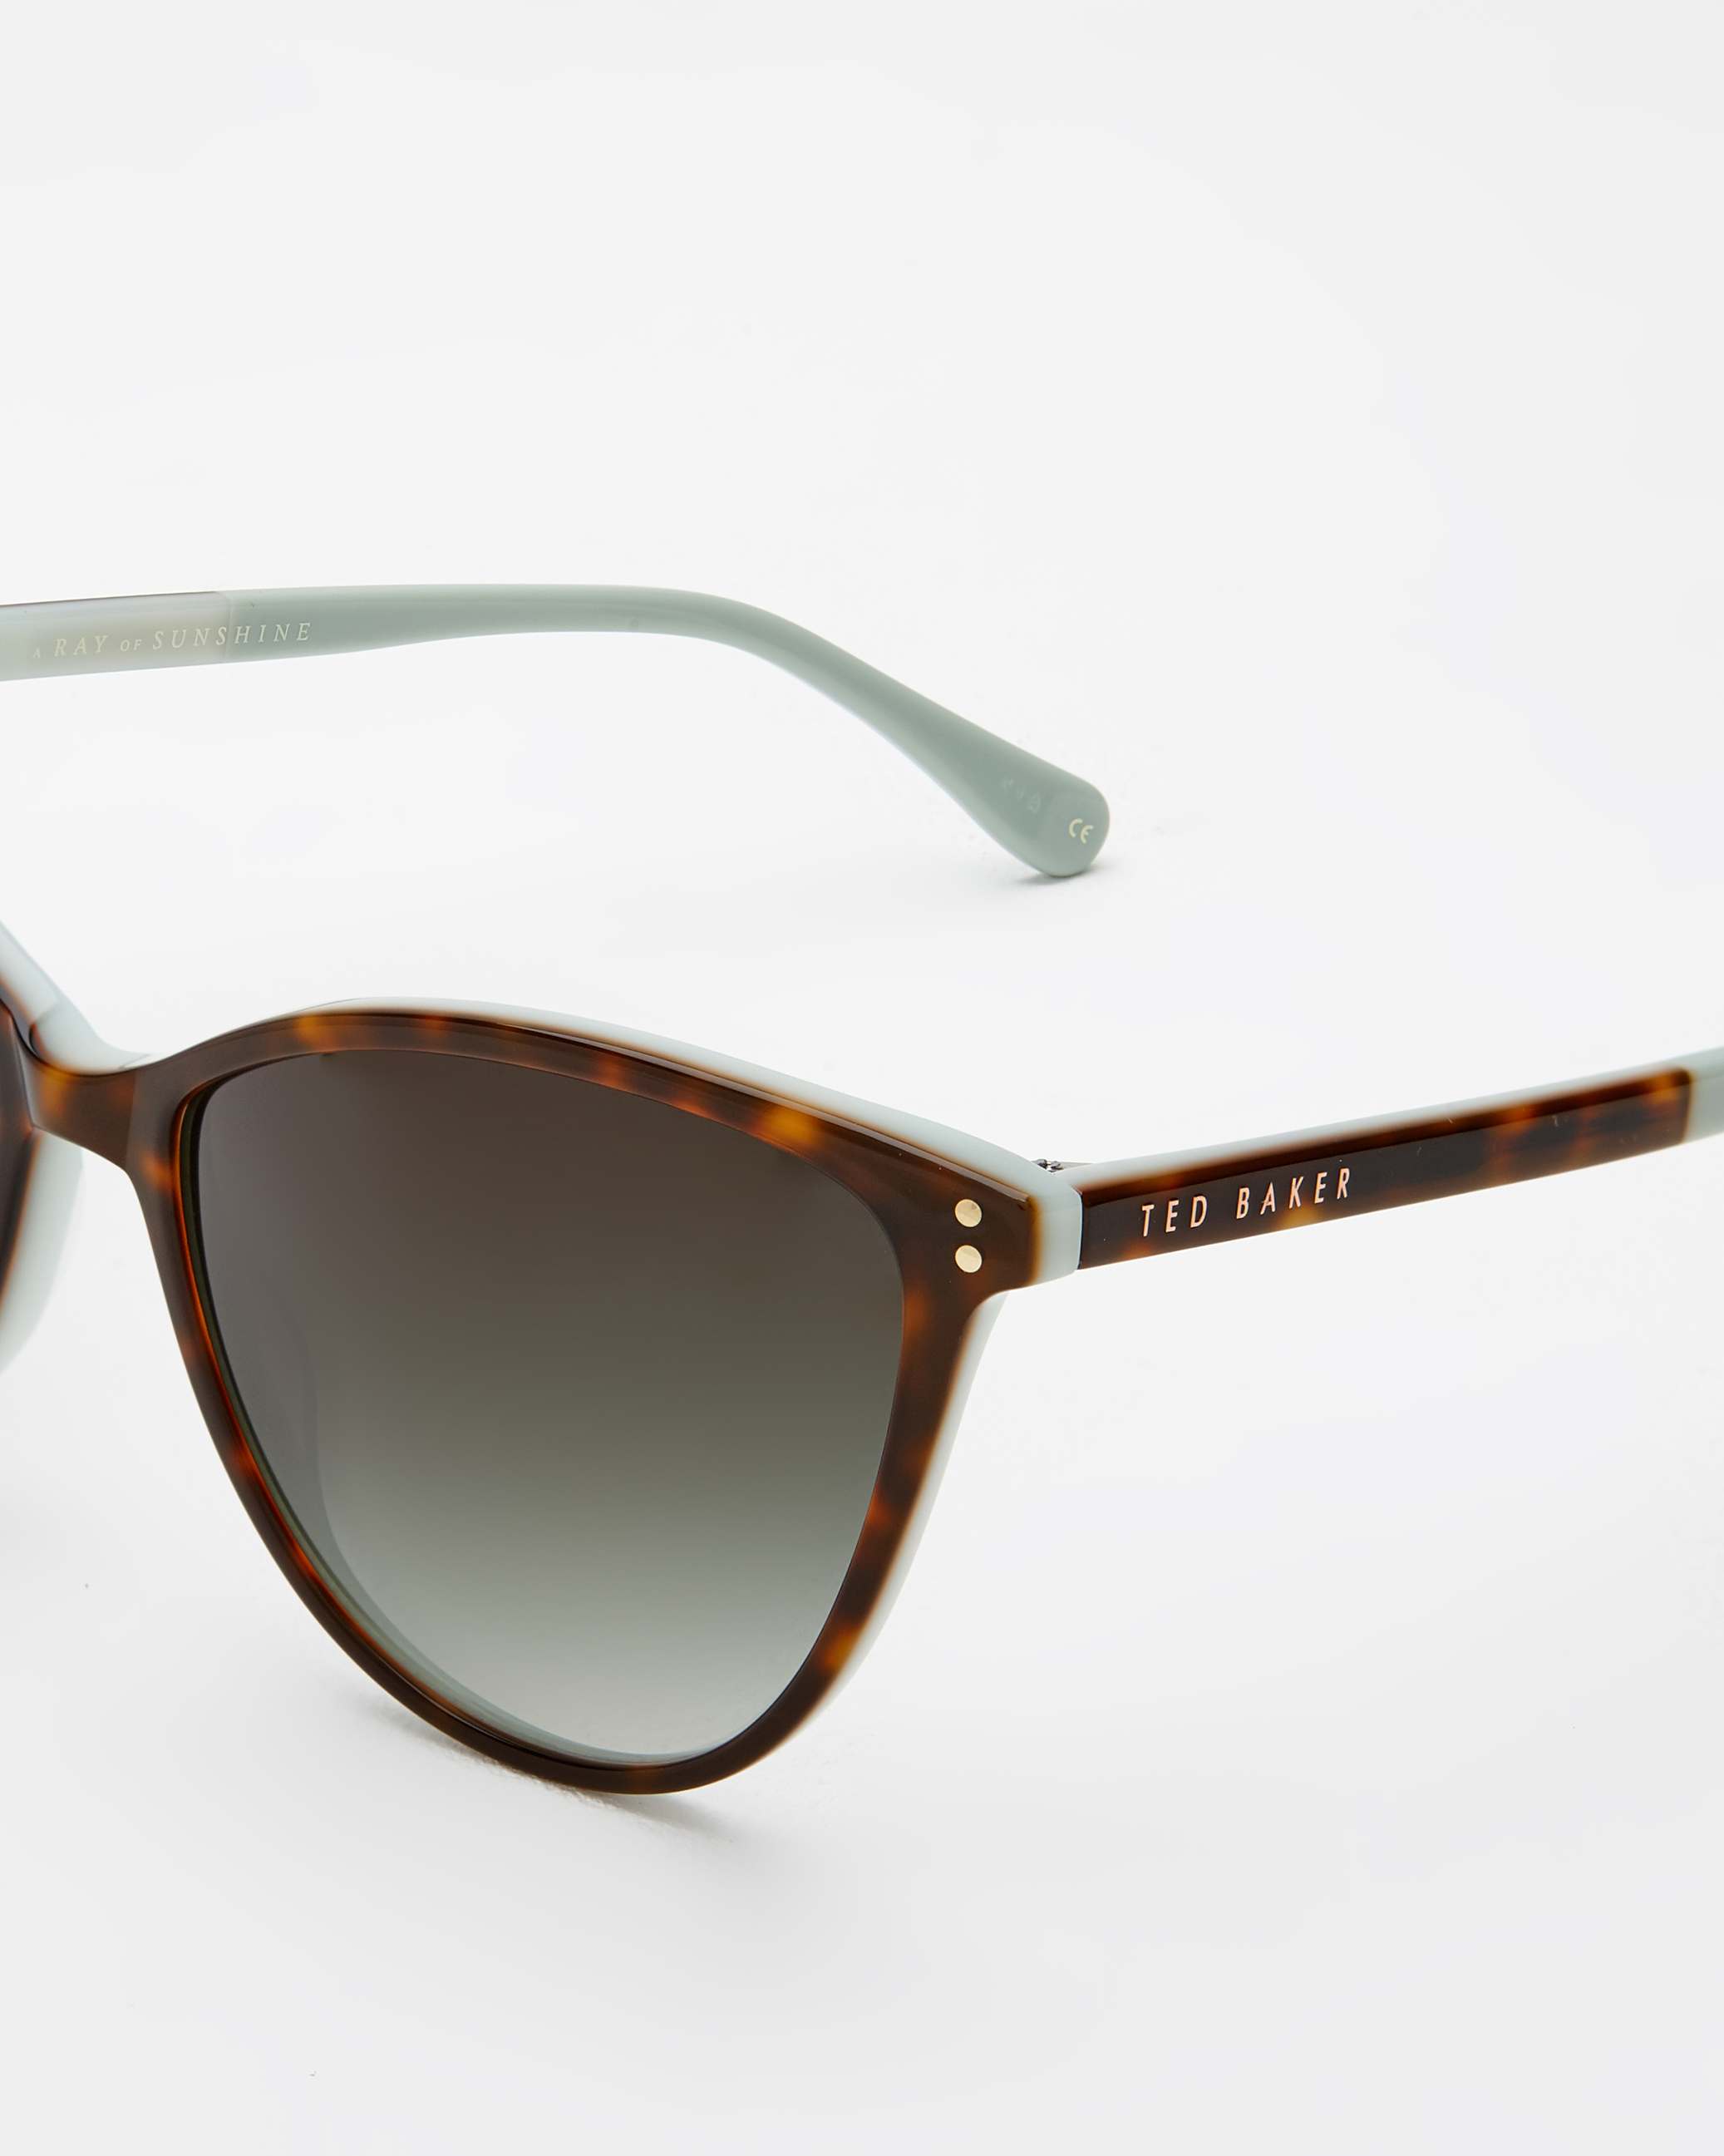 ted baker sunglasses a ray of sunshine